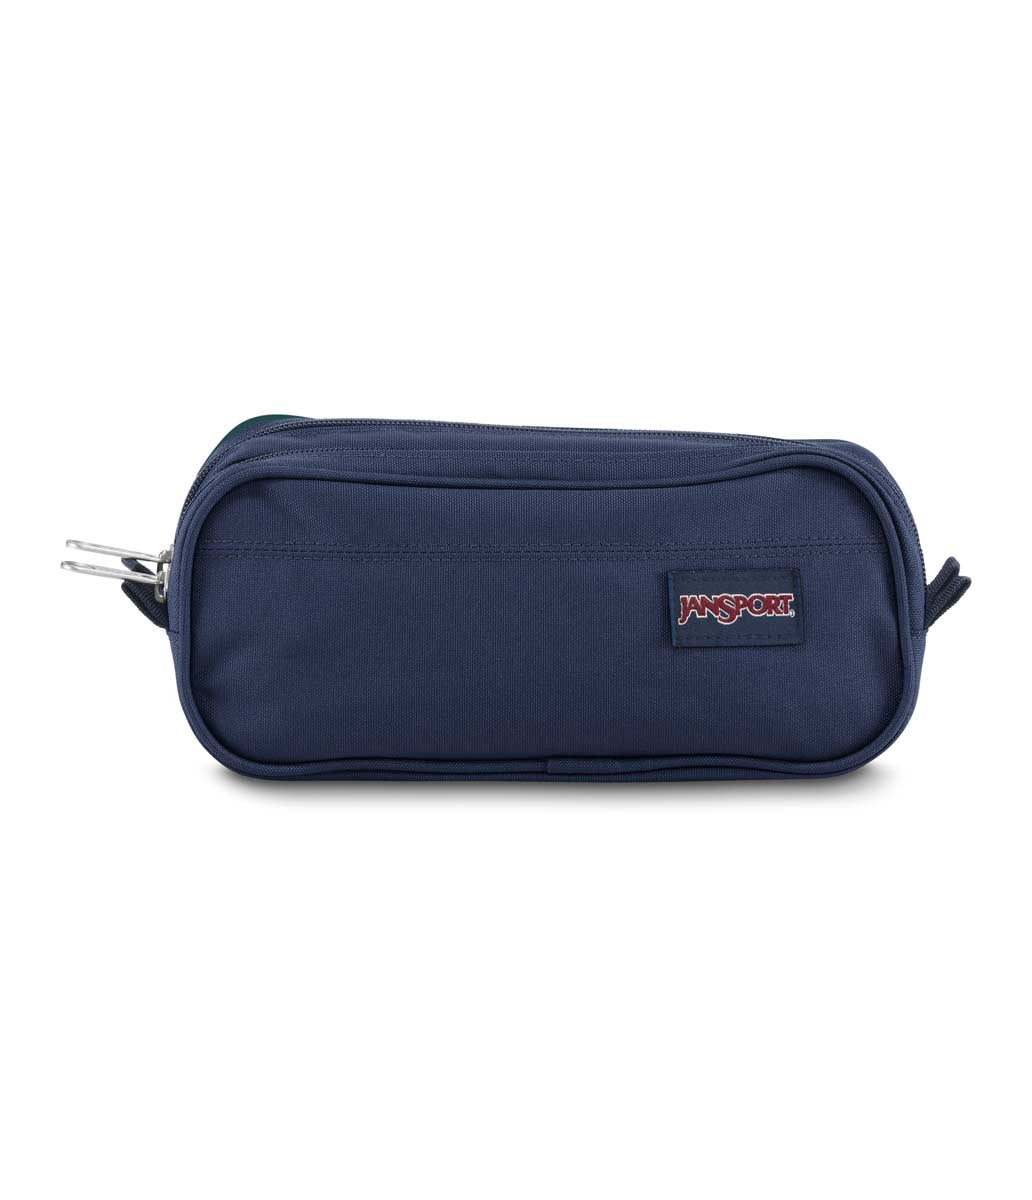 LARGE ACCESSORY POUCH Navy